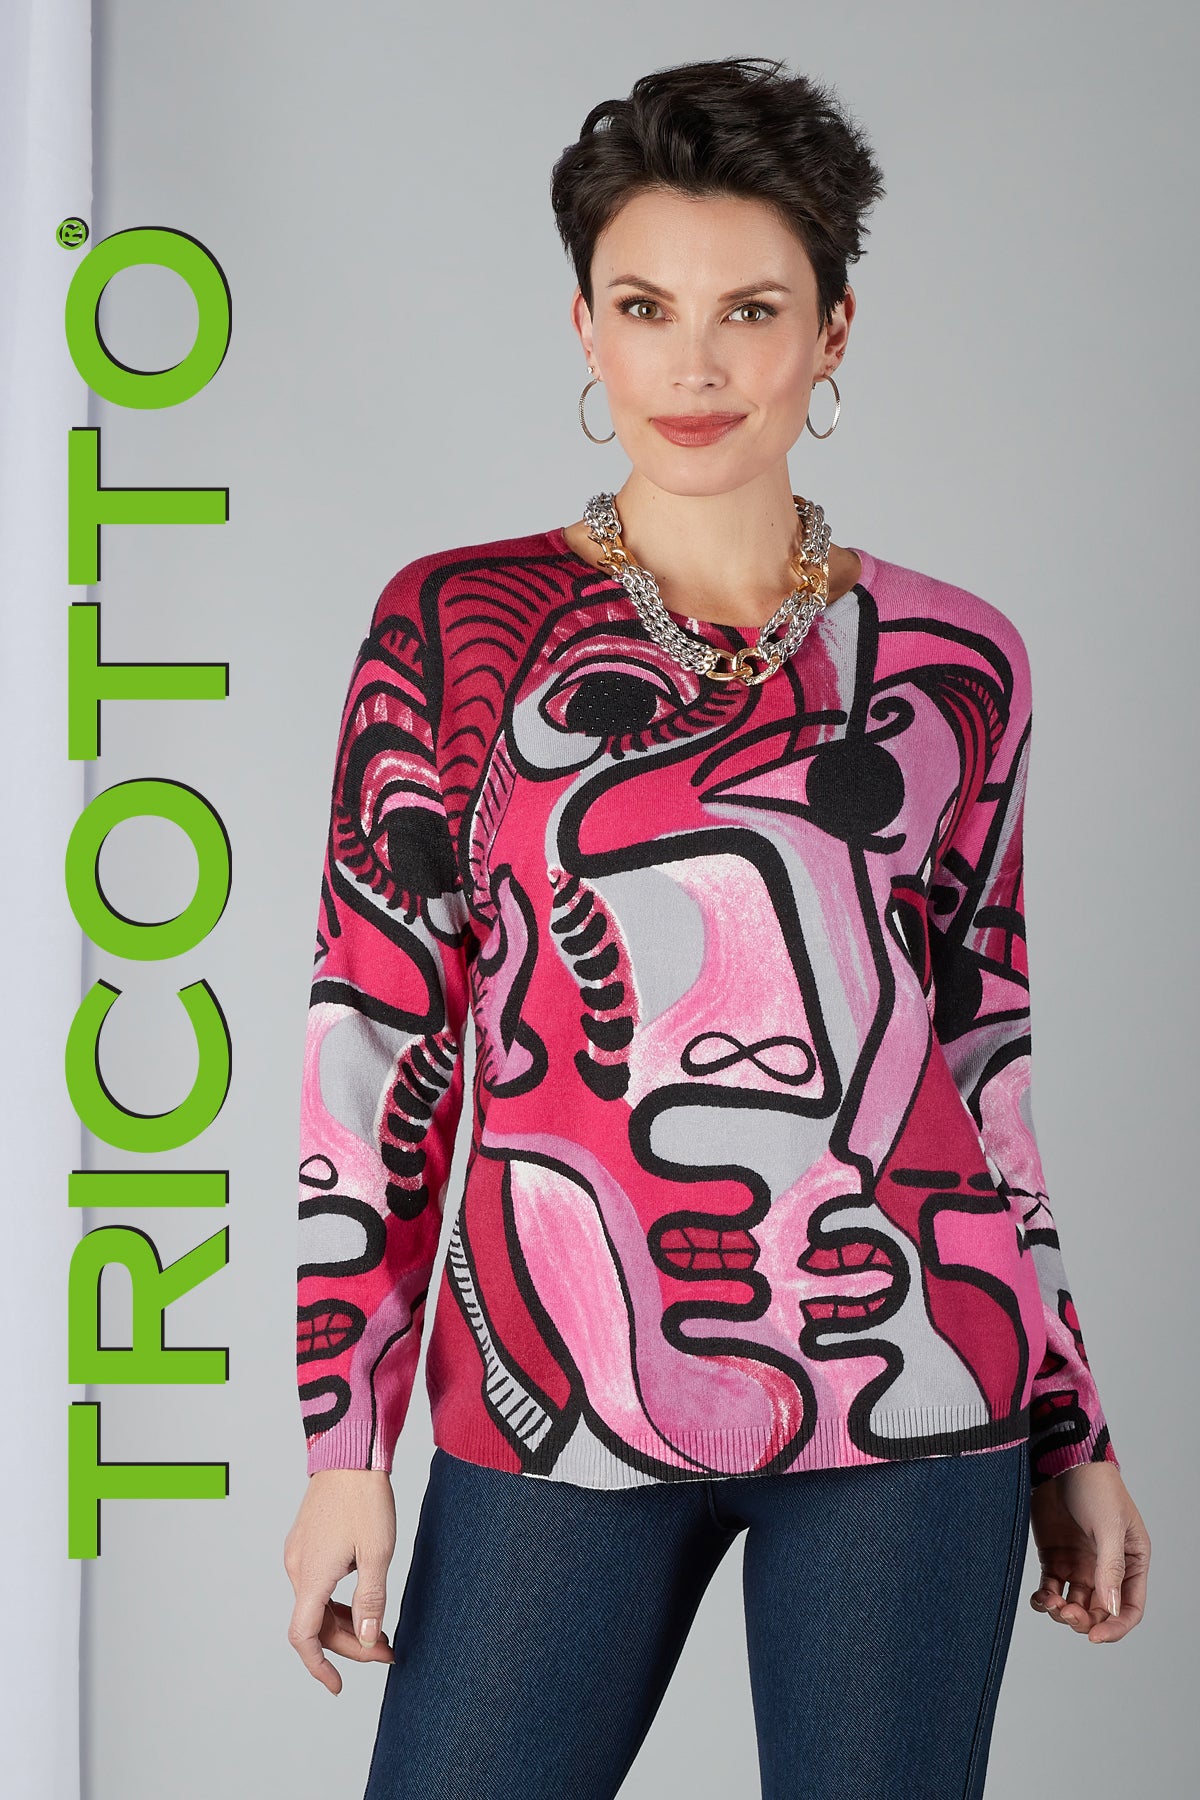 Tricotto Pink Sweater-Buy Tricotto Sweaters Online-Tricotto Clothing Montreal-Online Sweater Shop